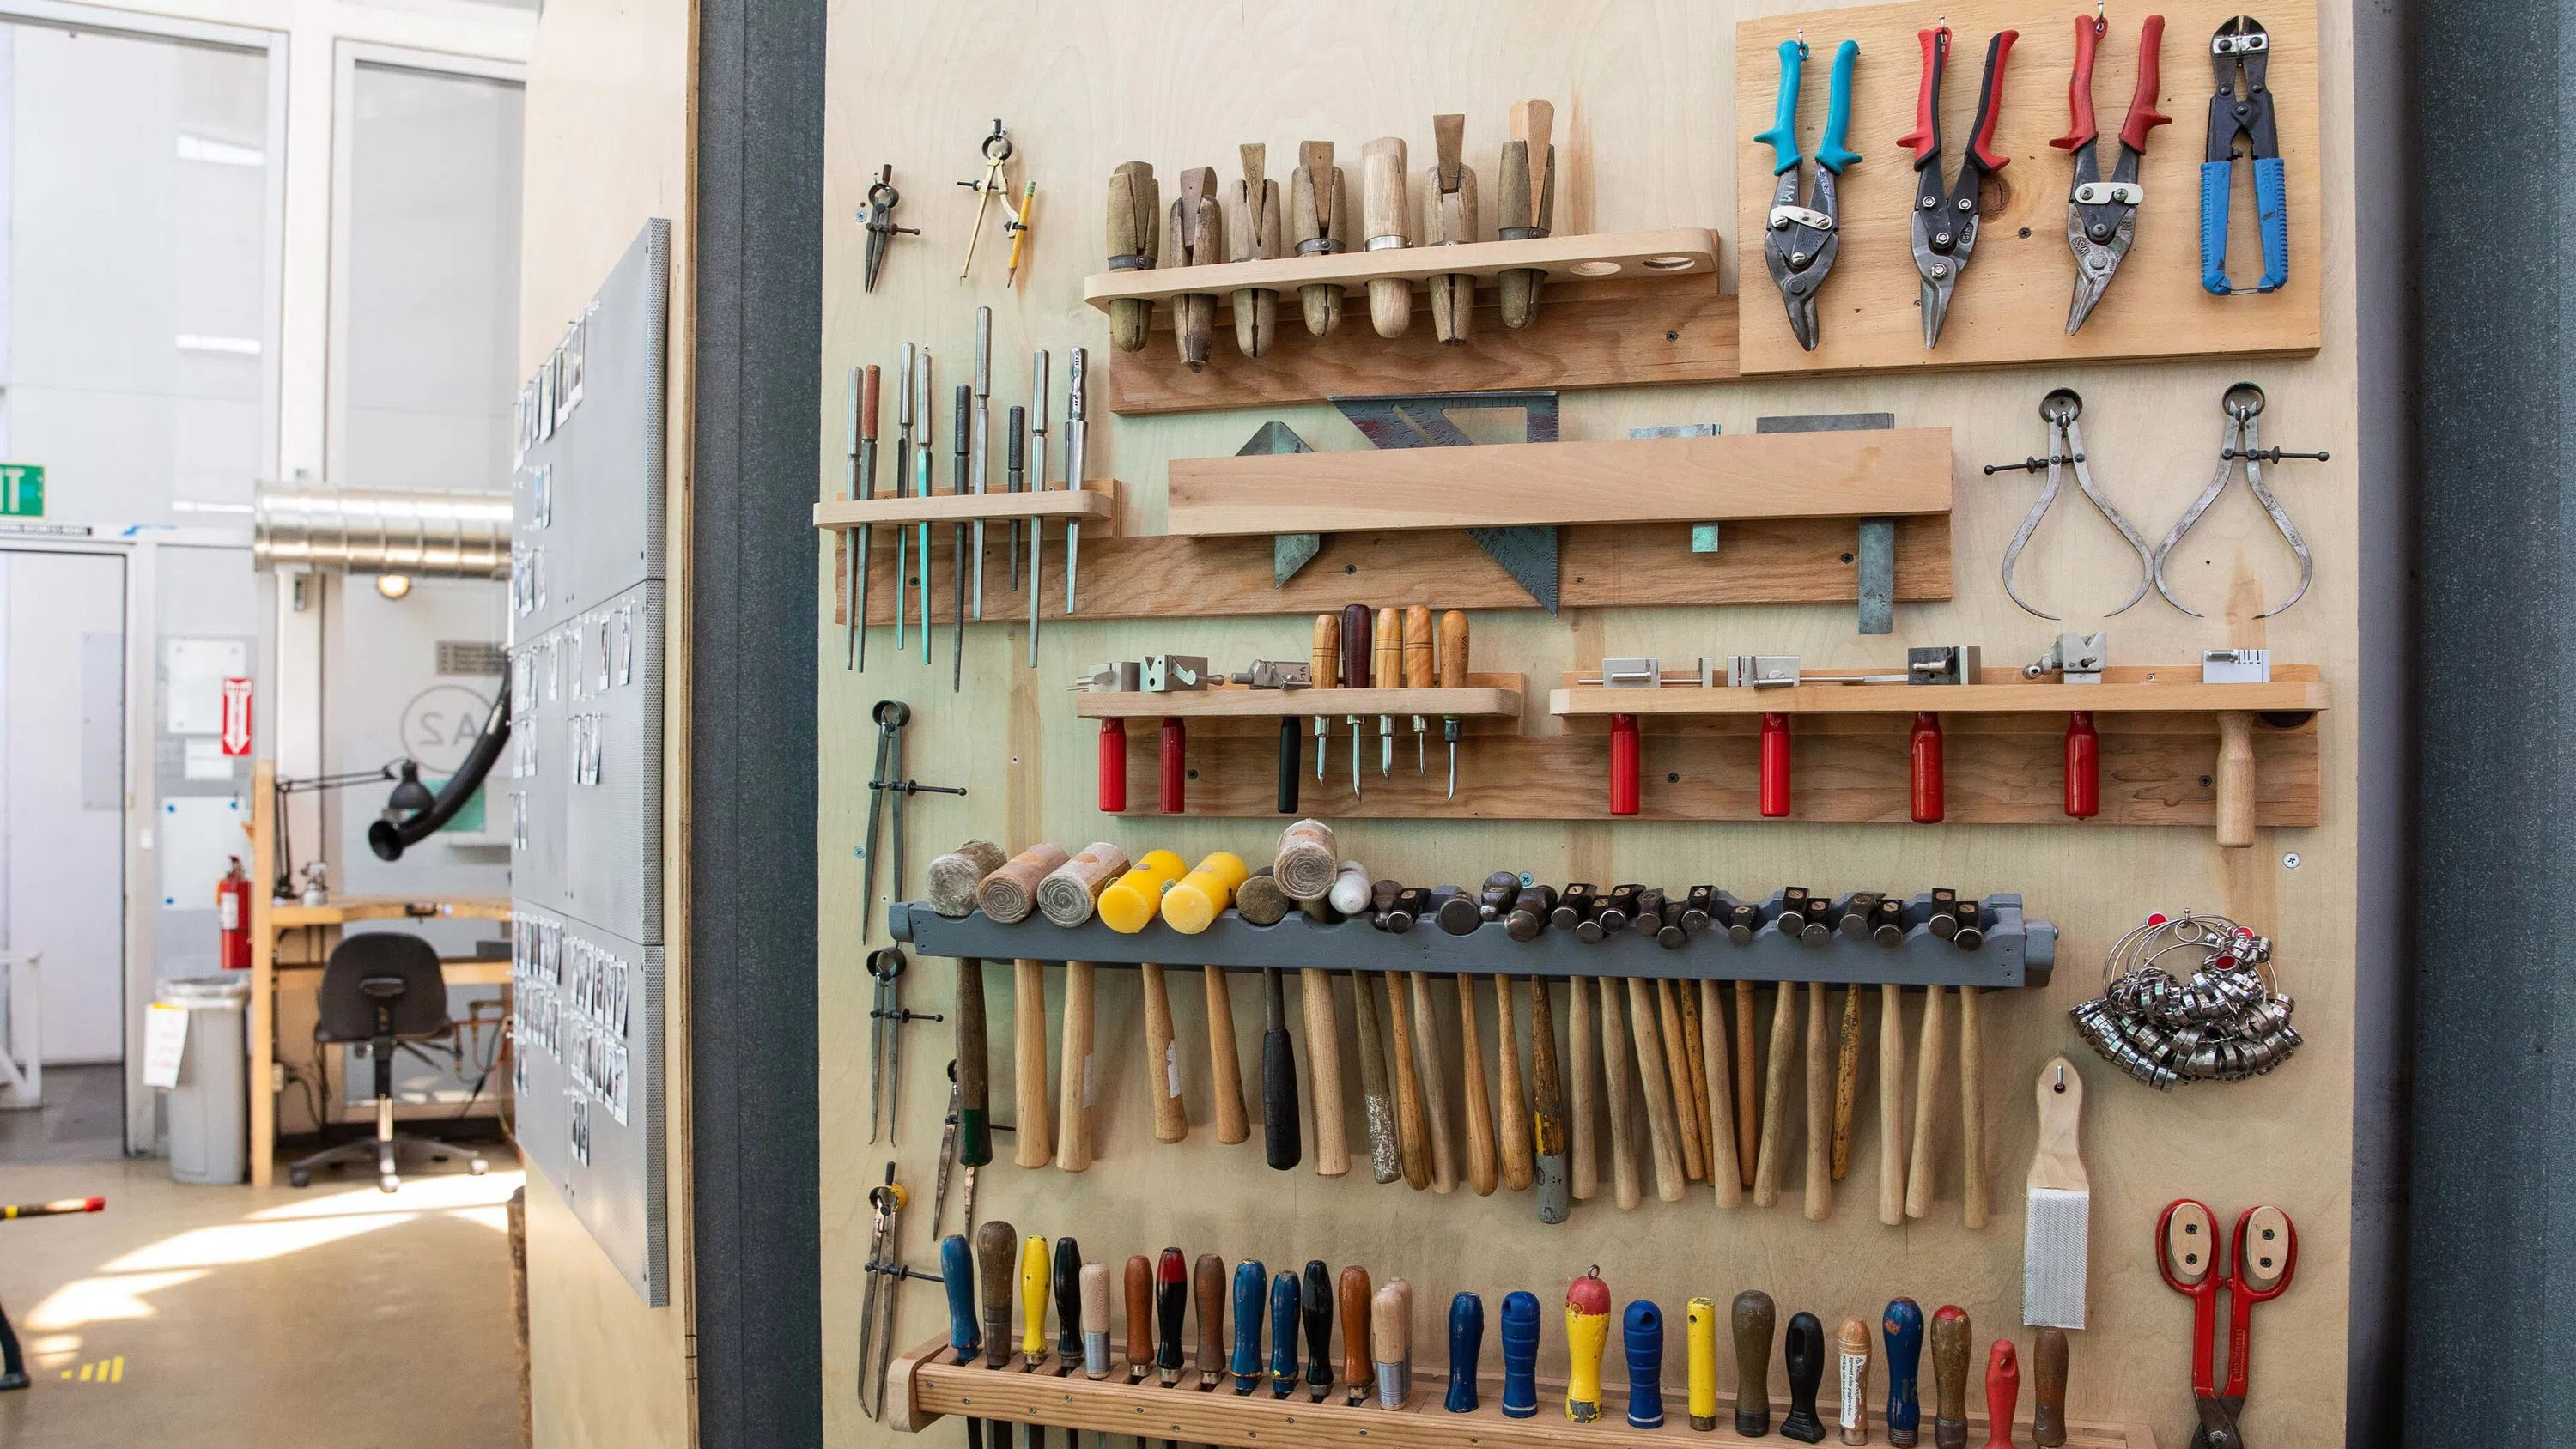 A wall lined with hammers, pliers, and other tools for metal smithing.